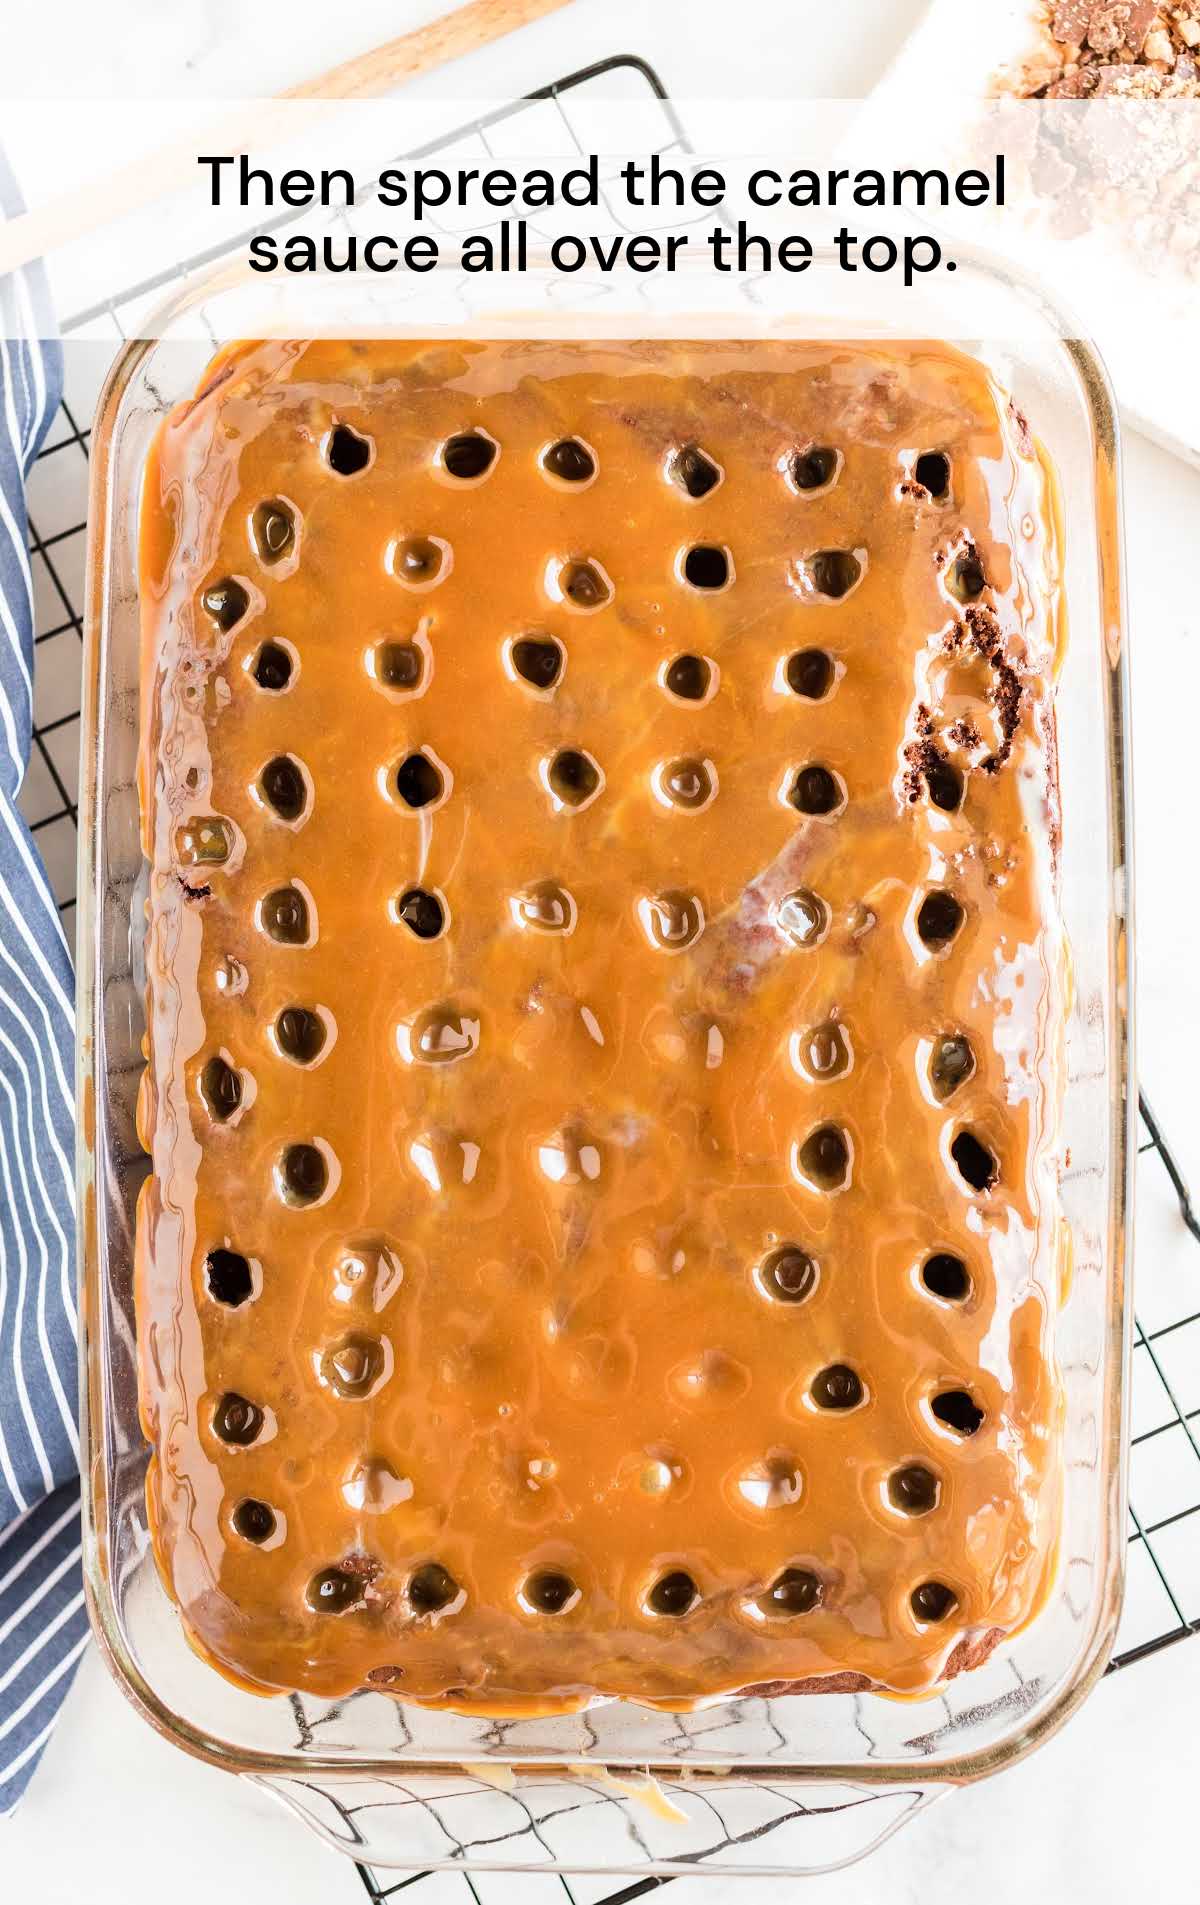 caramel sauce spread over the top in a baking dish